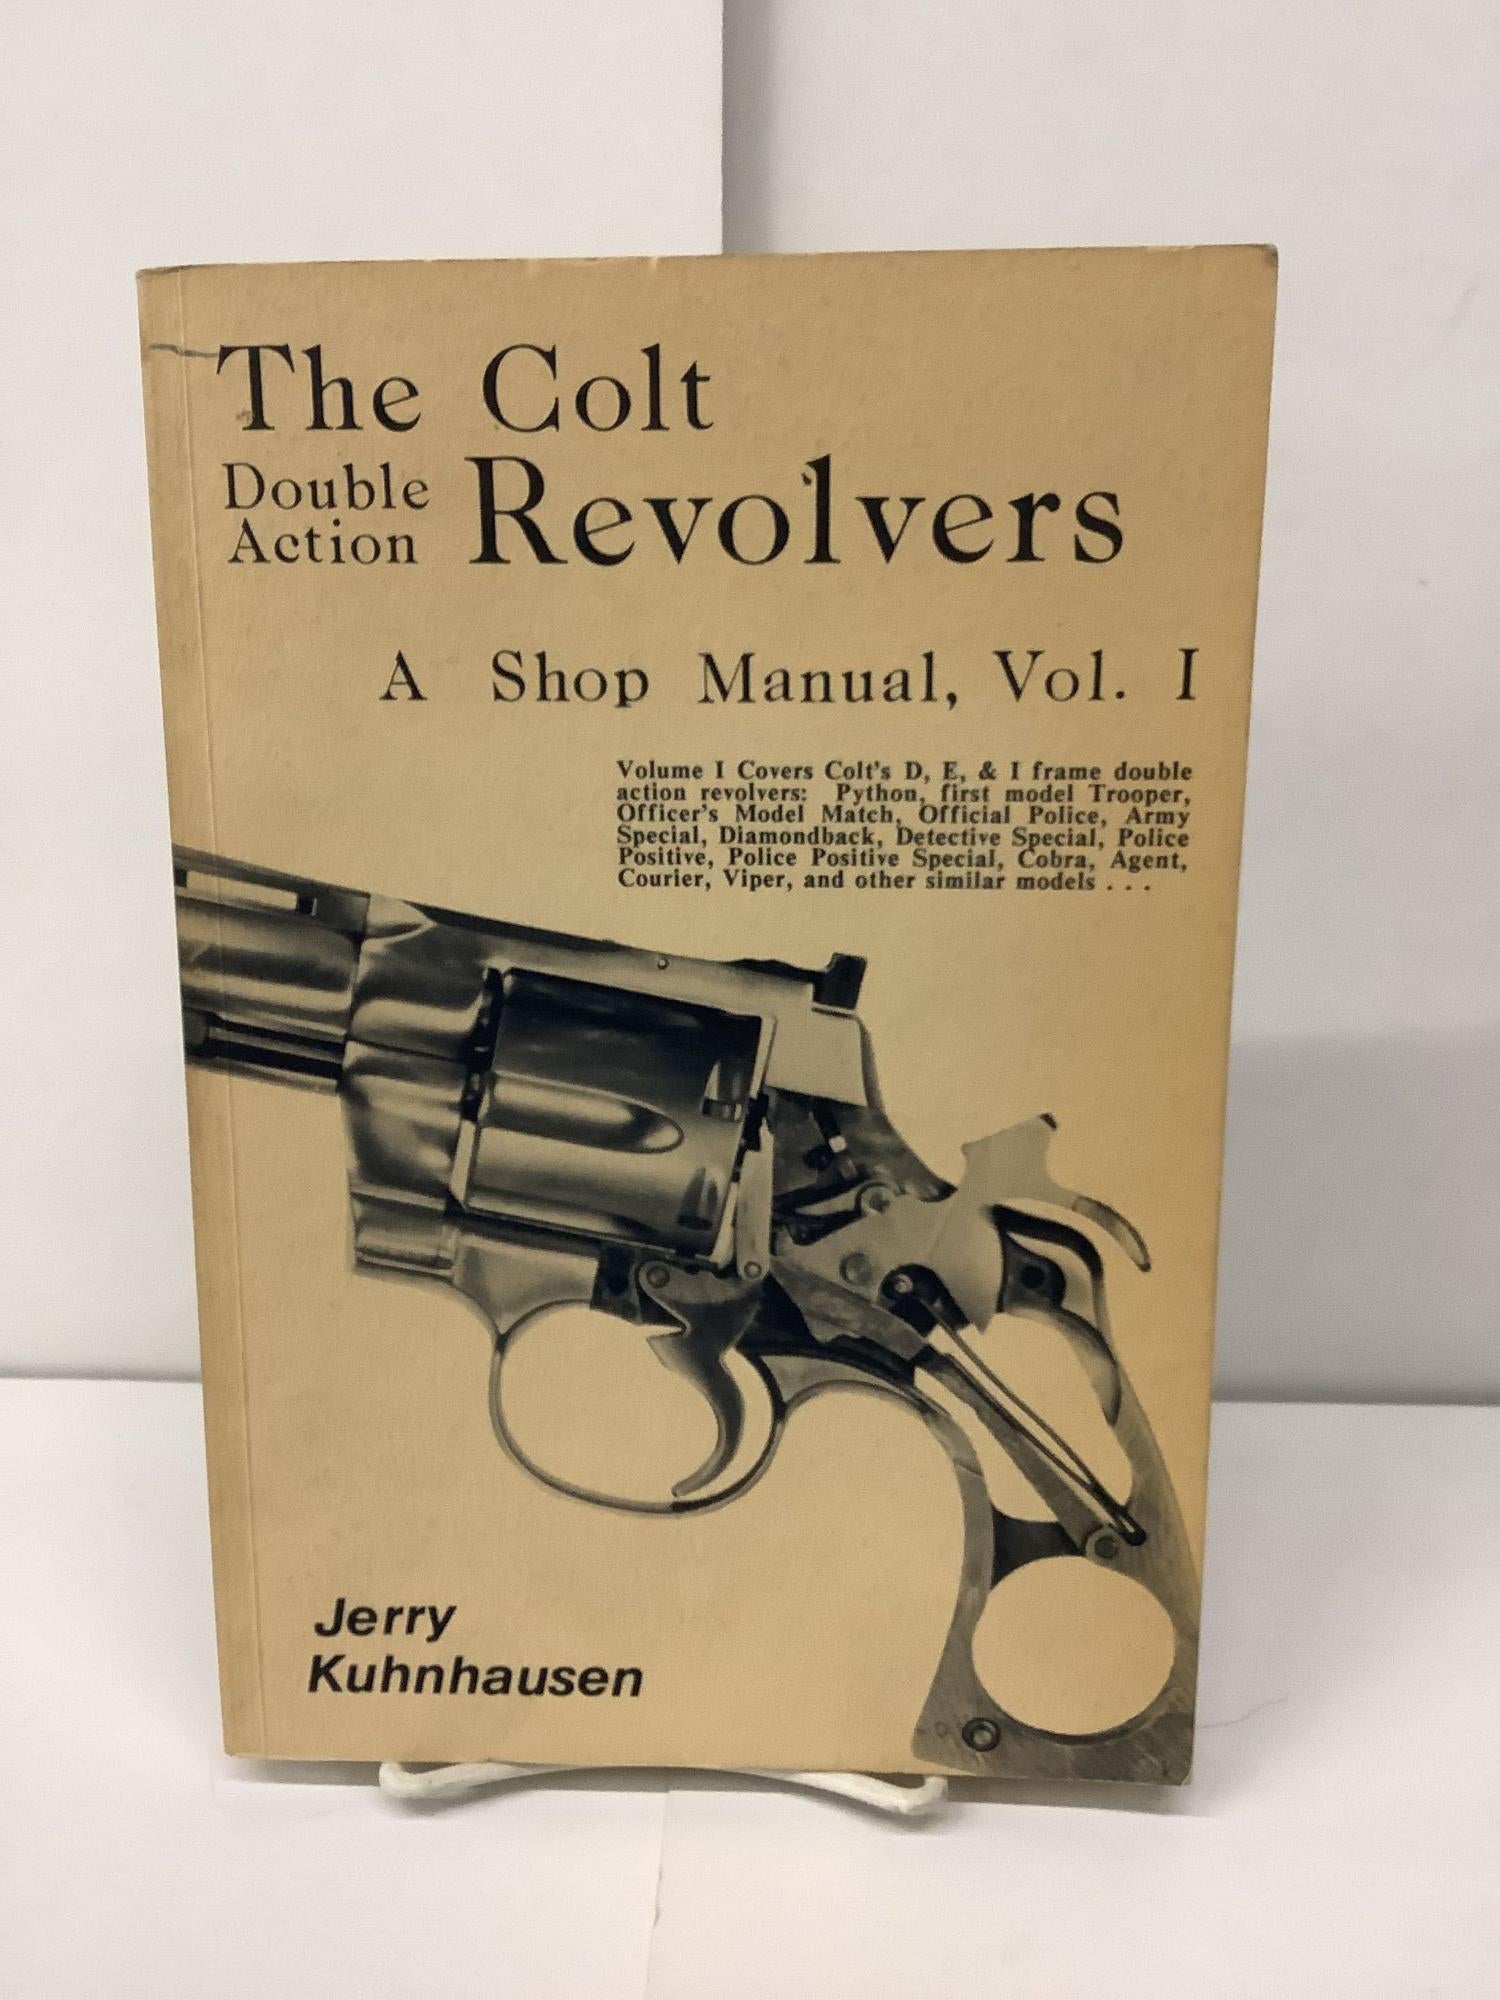 The Double Action Colt Revolvers; A Shop Manual, Vol. 1 | Jerry Kuhnhausen